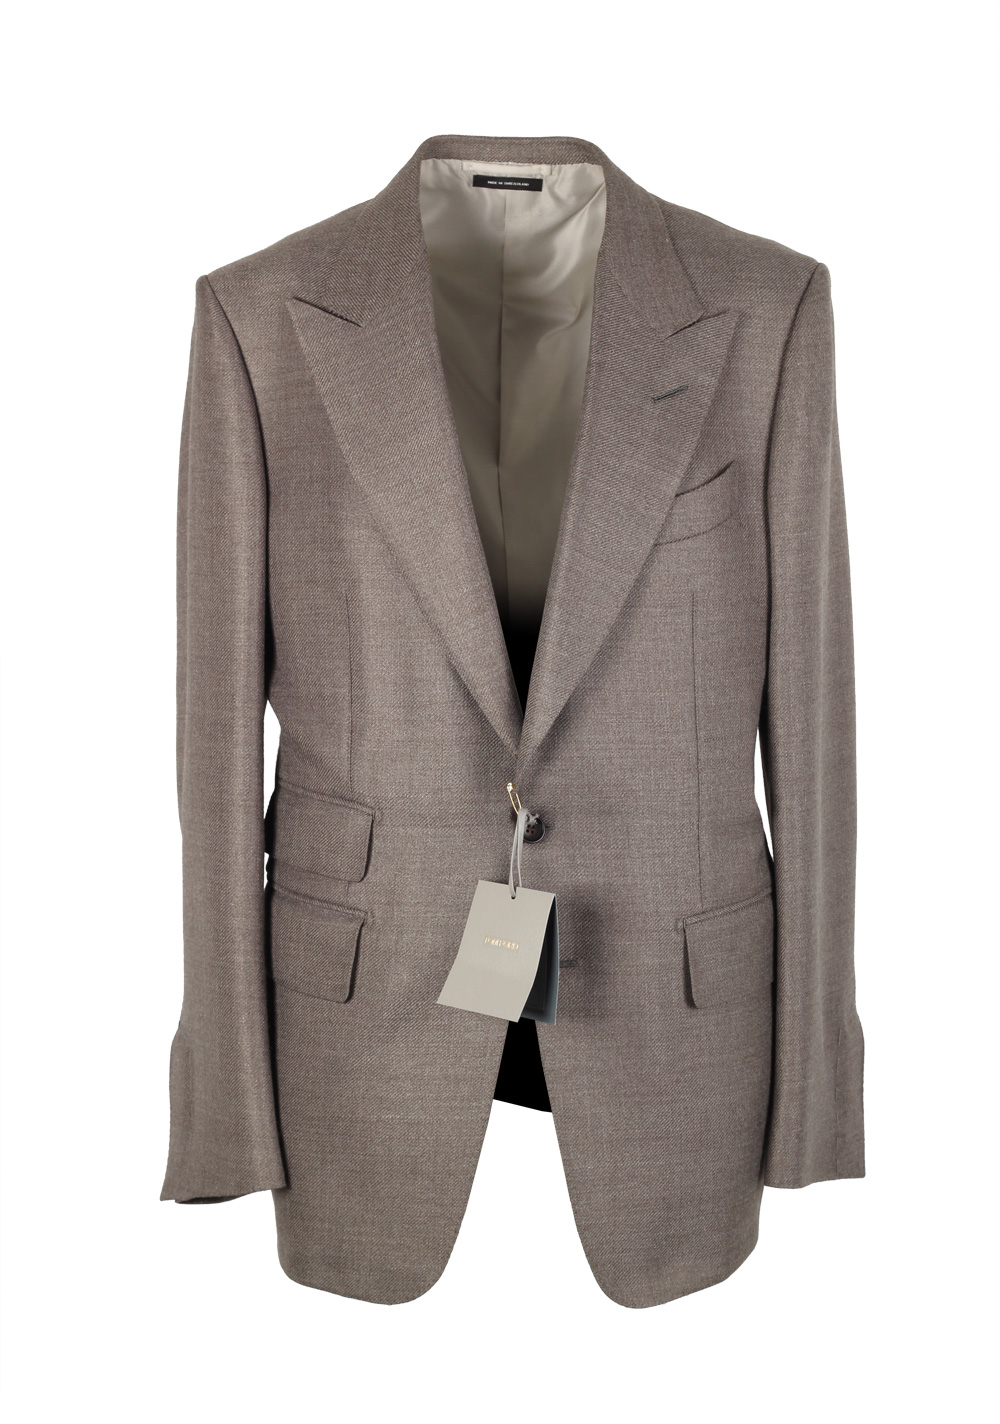 TOM FORD Shelton Beige Sport Coat Size 54 / 44R Wool Rayon | Costume Limité